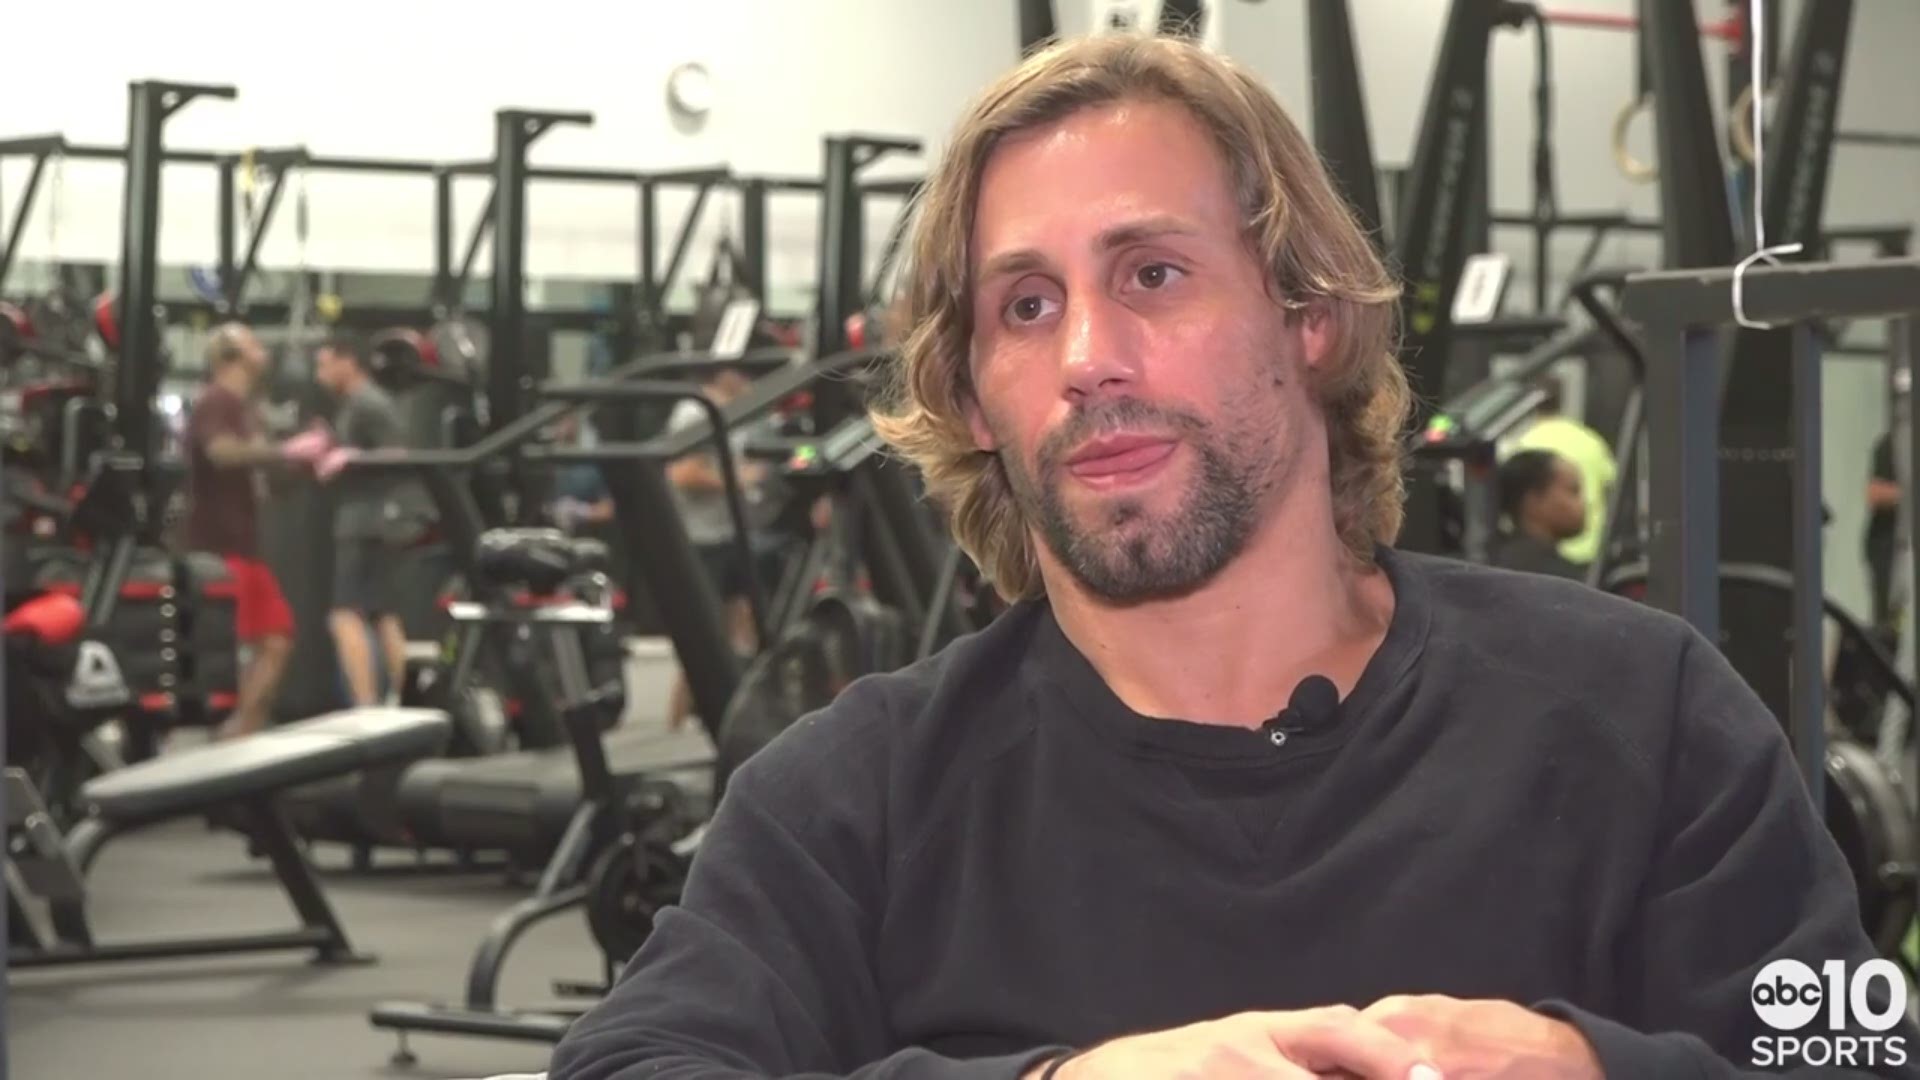 UFC Hall of Famer & Bantamweight contender Urijah Faber sits down with ABC10 to preview his next fight at UFC 245 in Las Vegas on Saturday against Petr Yan.